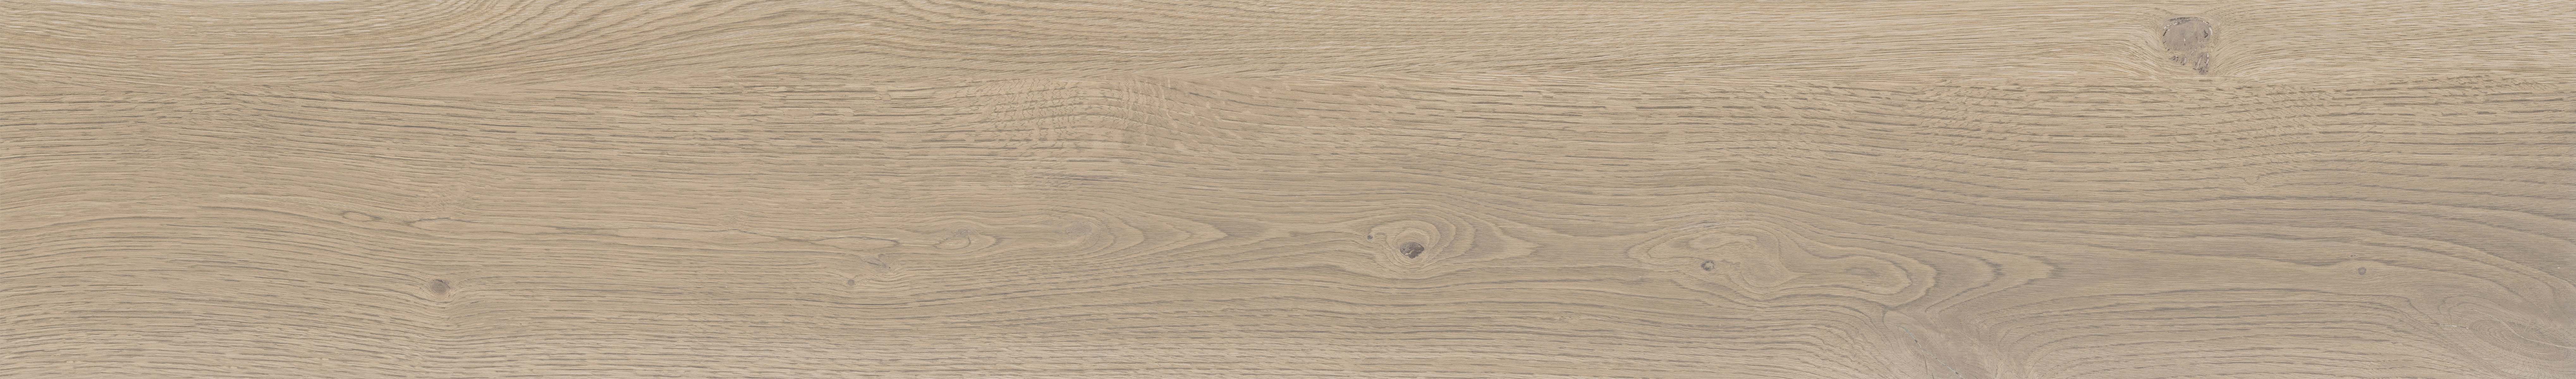 ABK Poetry Wood Gold Naturale PF60010054 26,5x180cm rectified 8,5mm